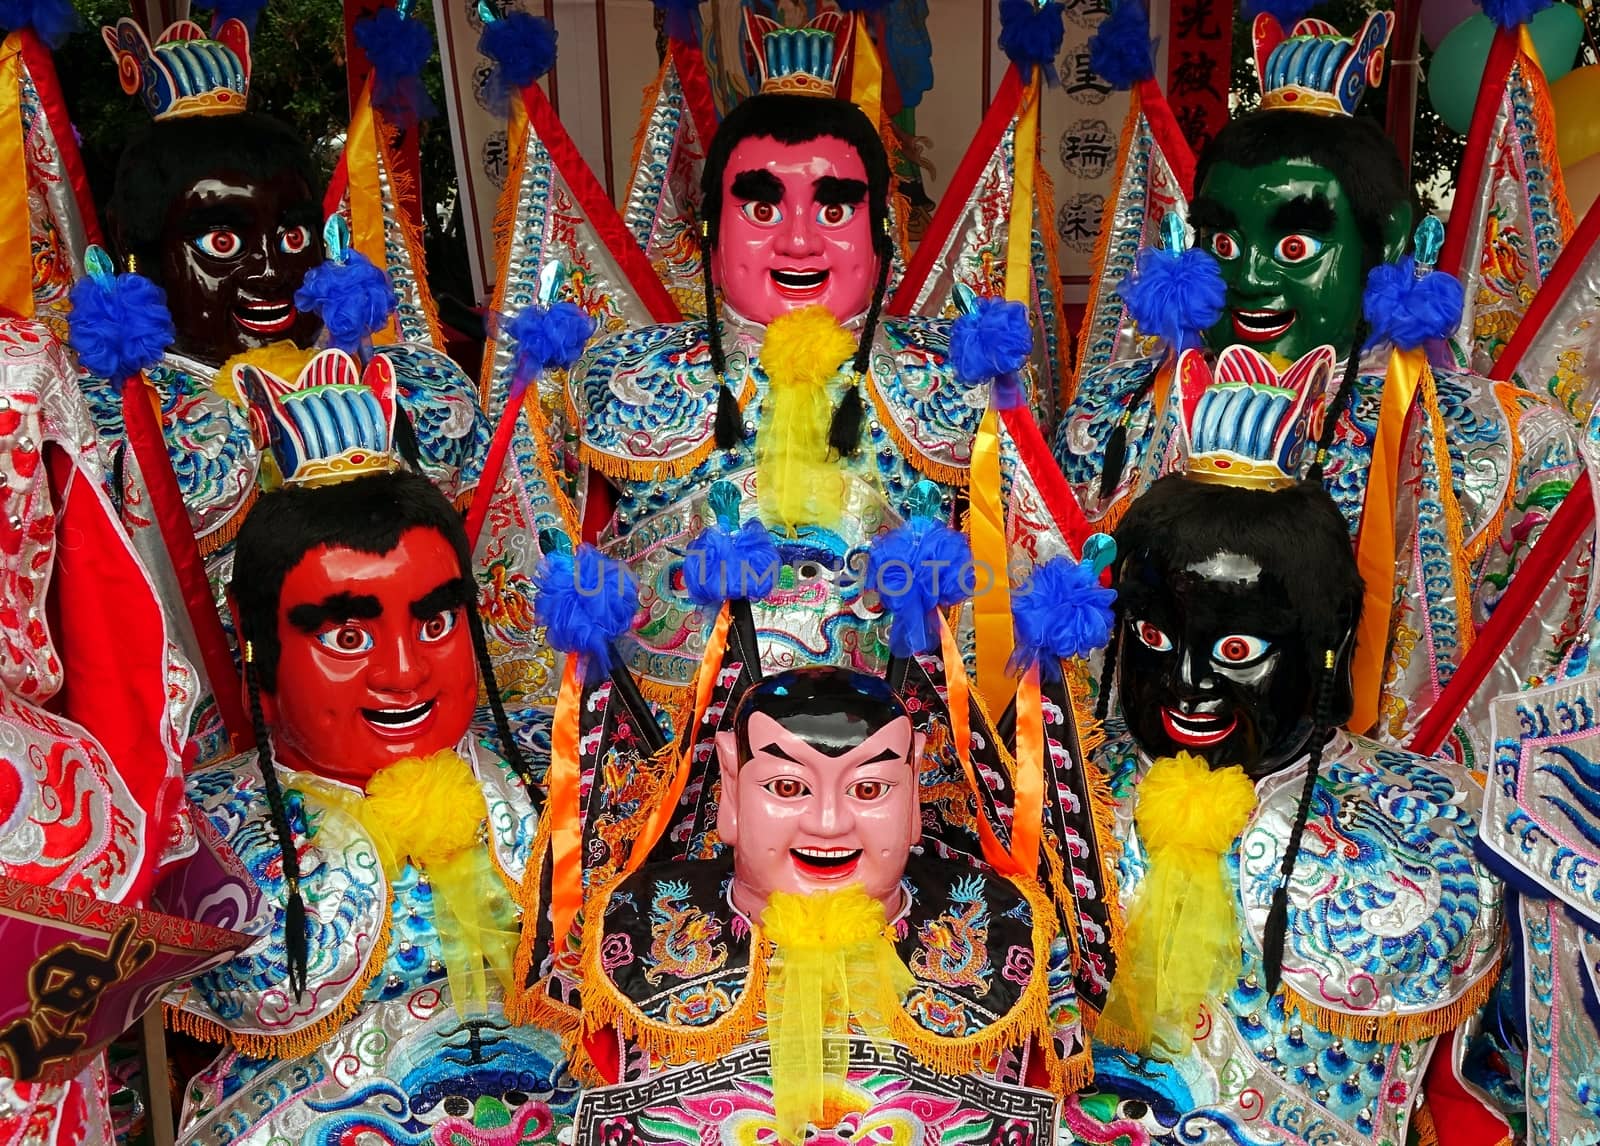 KAOHSIUNG, TAIWAN -- AUGUST 15, 2015: Elaborate masks for the dancers of the Third Prince temple carnival are on display at the Sanfeng Temple.
